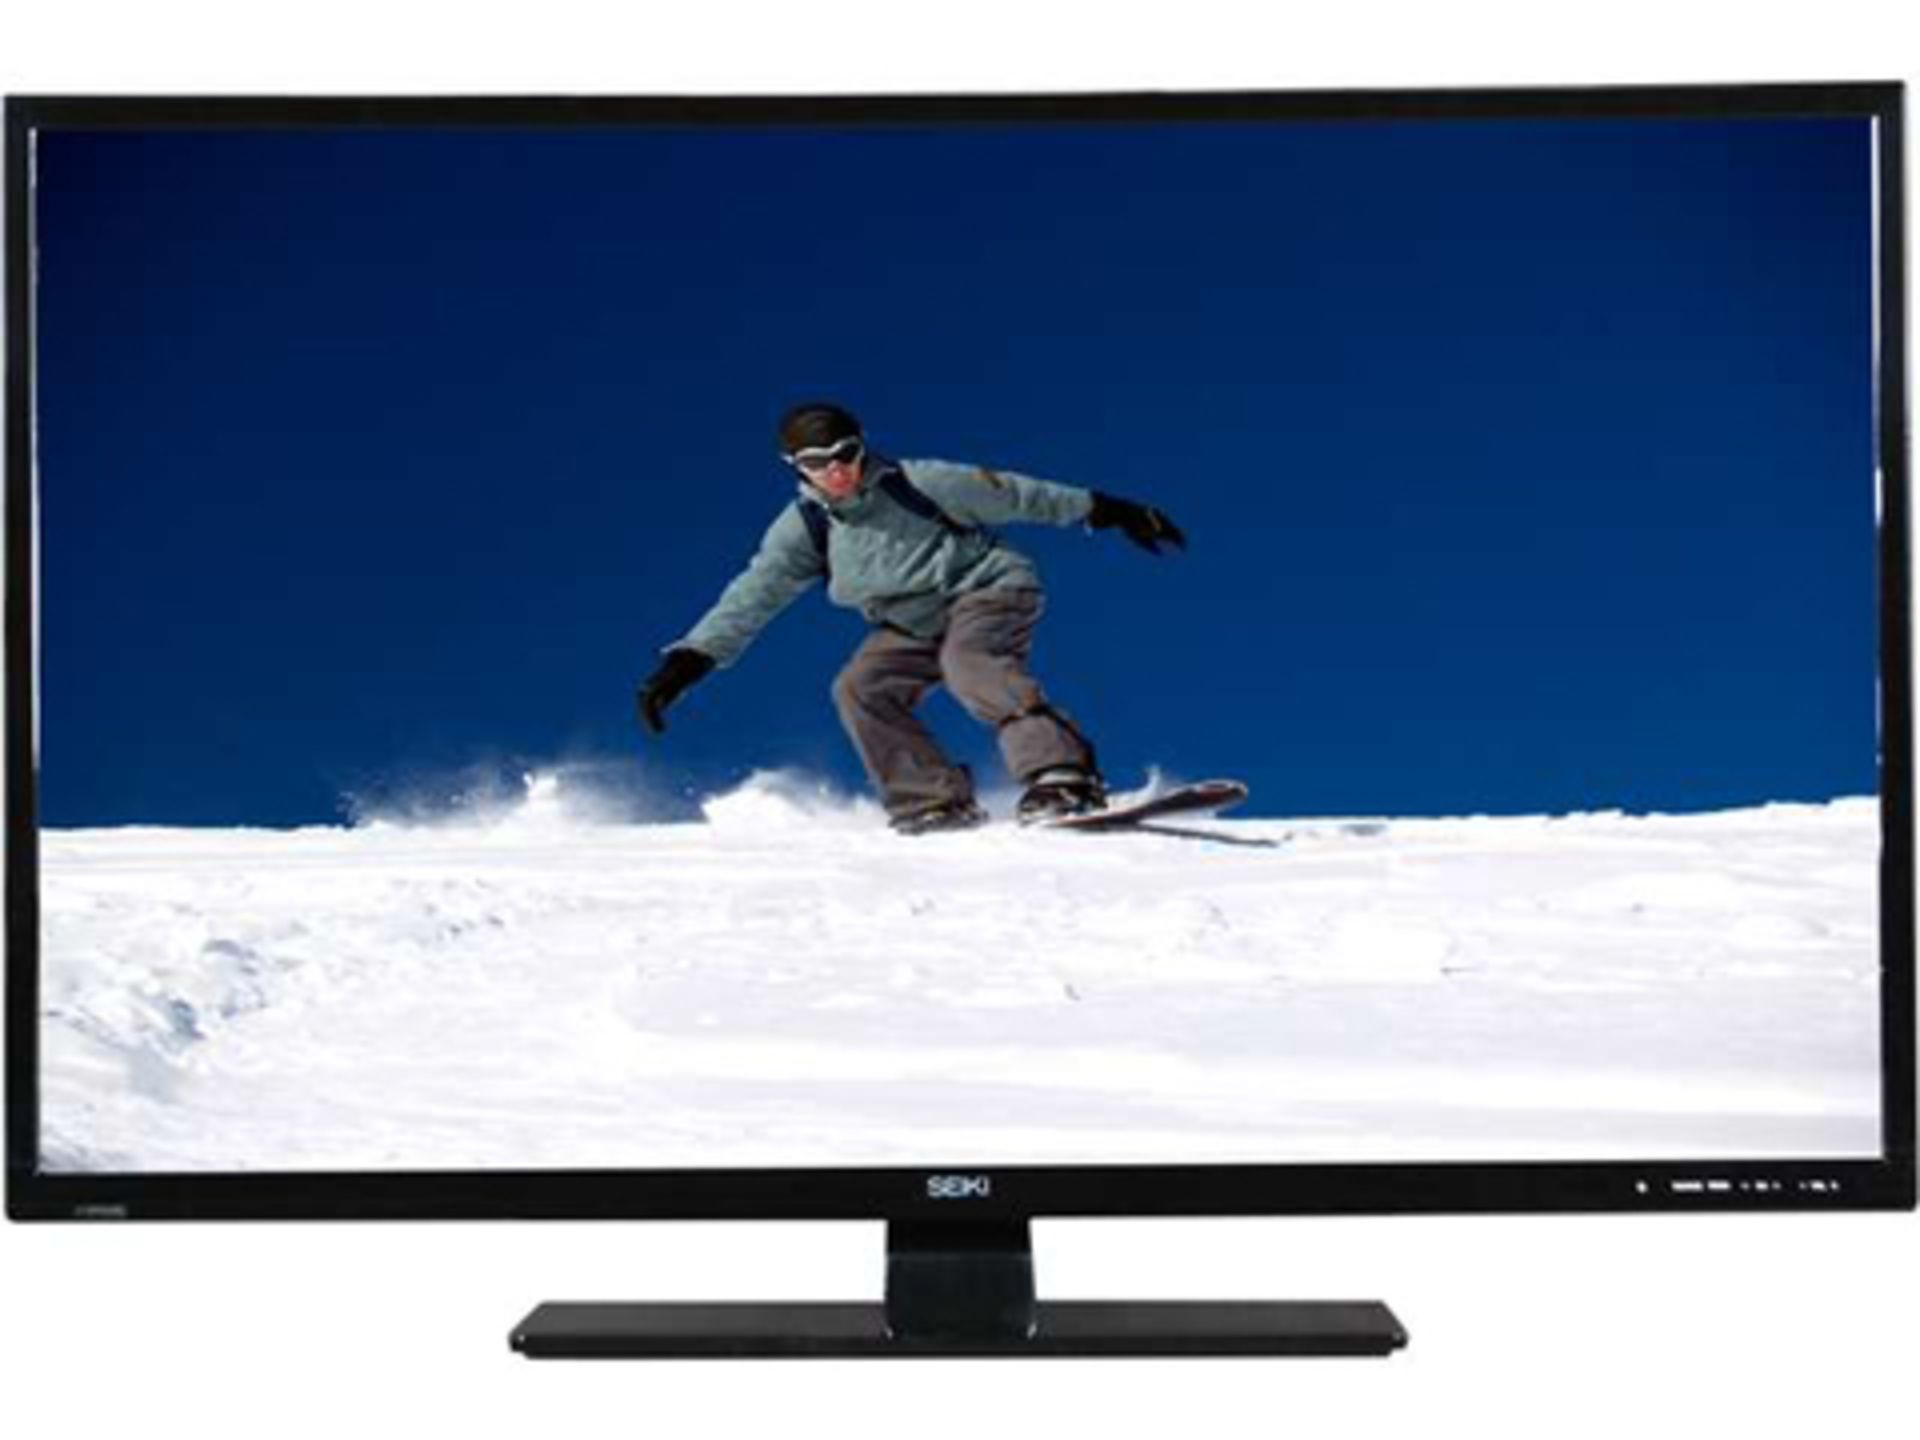 V Seiki 39" LED TV Direct Lit HD TV - HDMI - Freeview - New With 12 Month Warranty